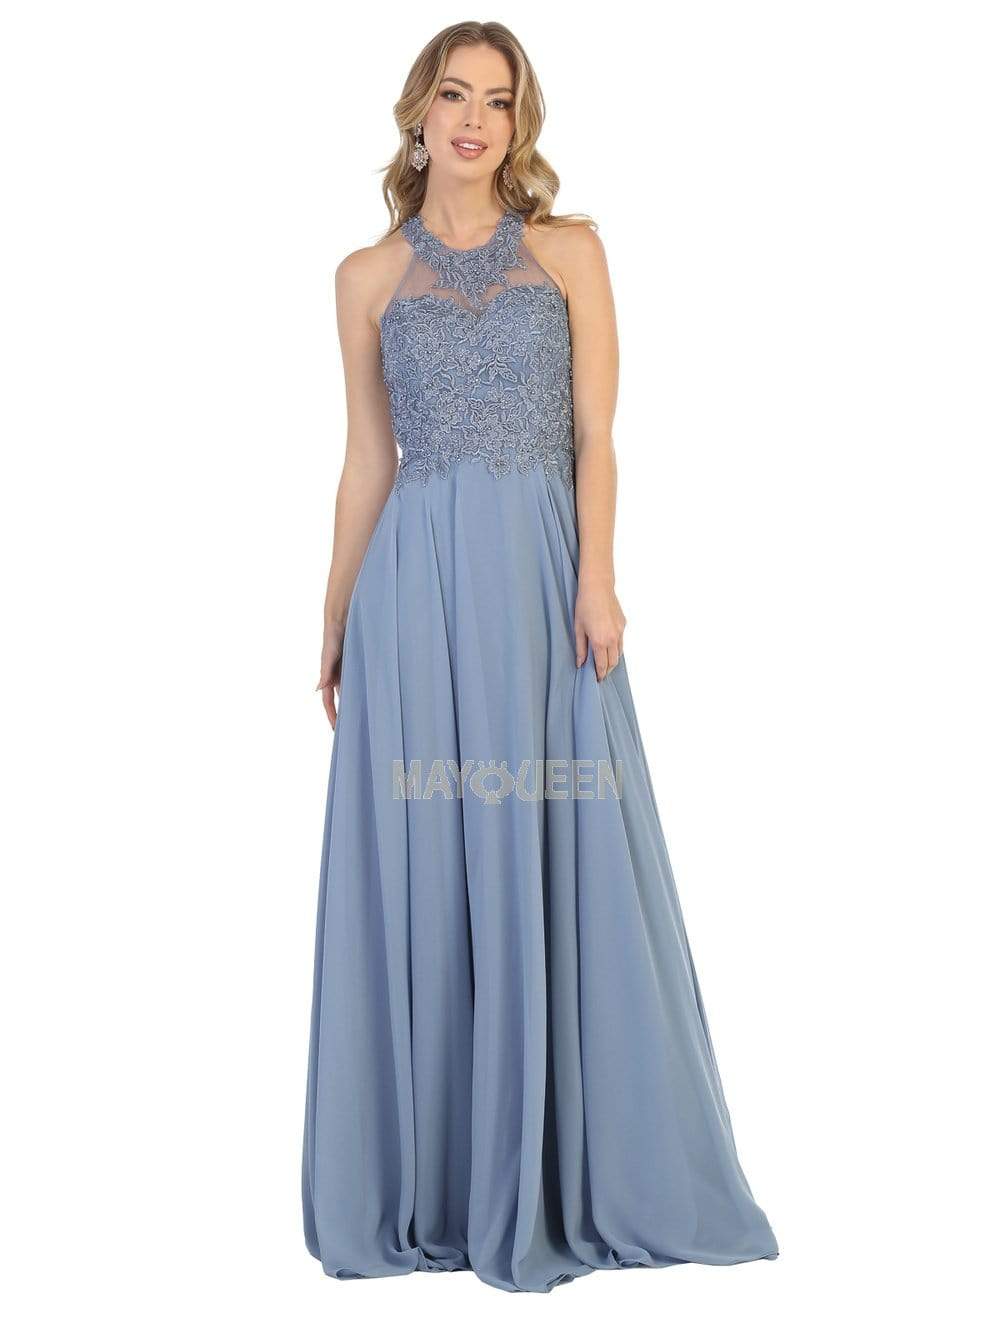 May Queen - MQ1557 Embroidered Halter Neck A-line Dress Bridesmaid Dresses 4 / Dusty-Blue